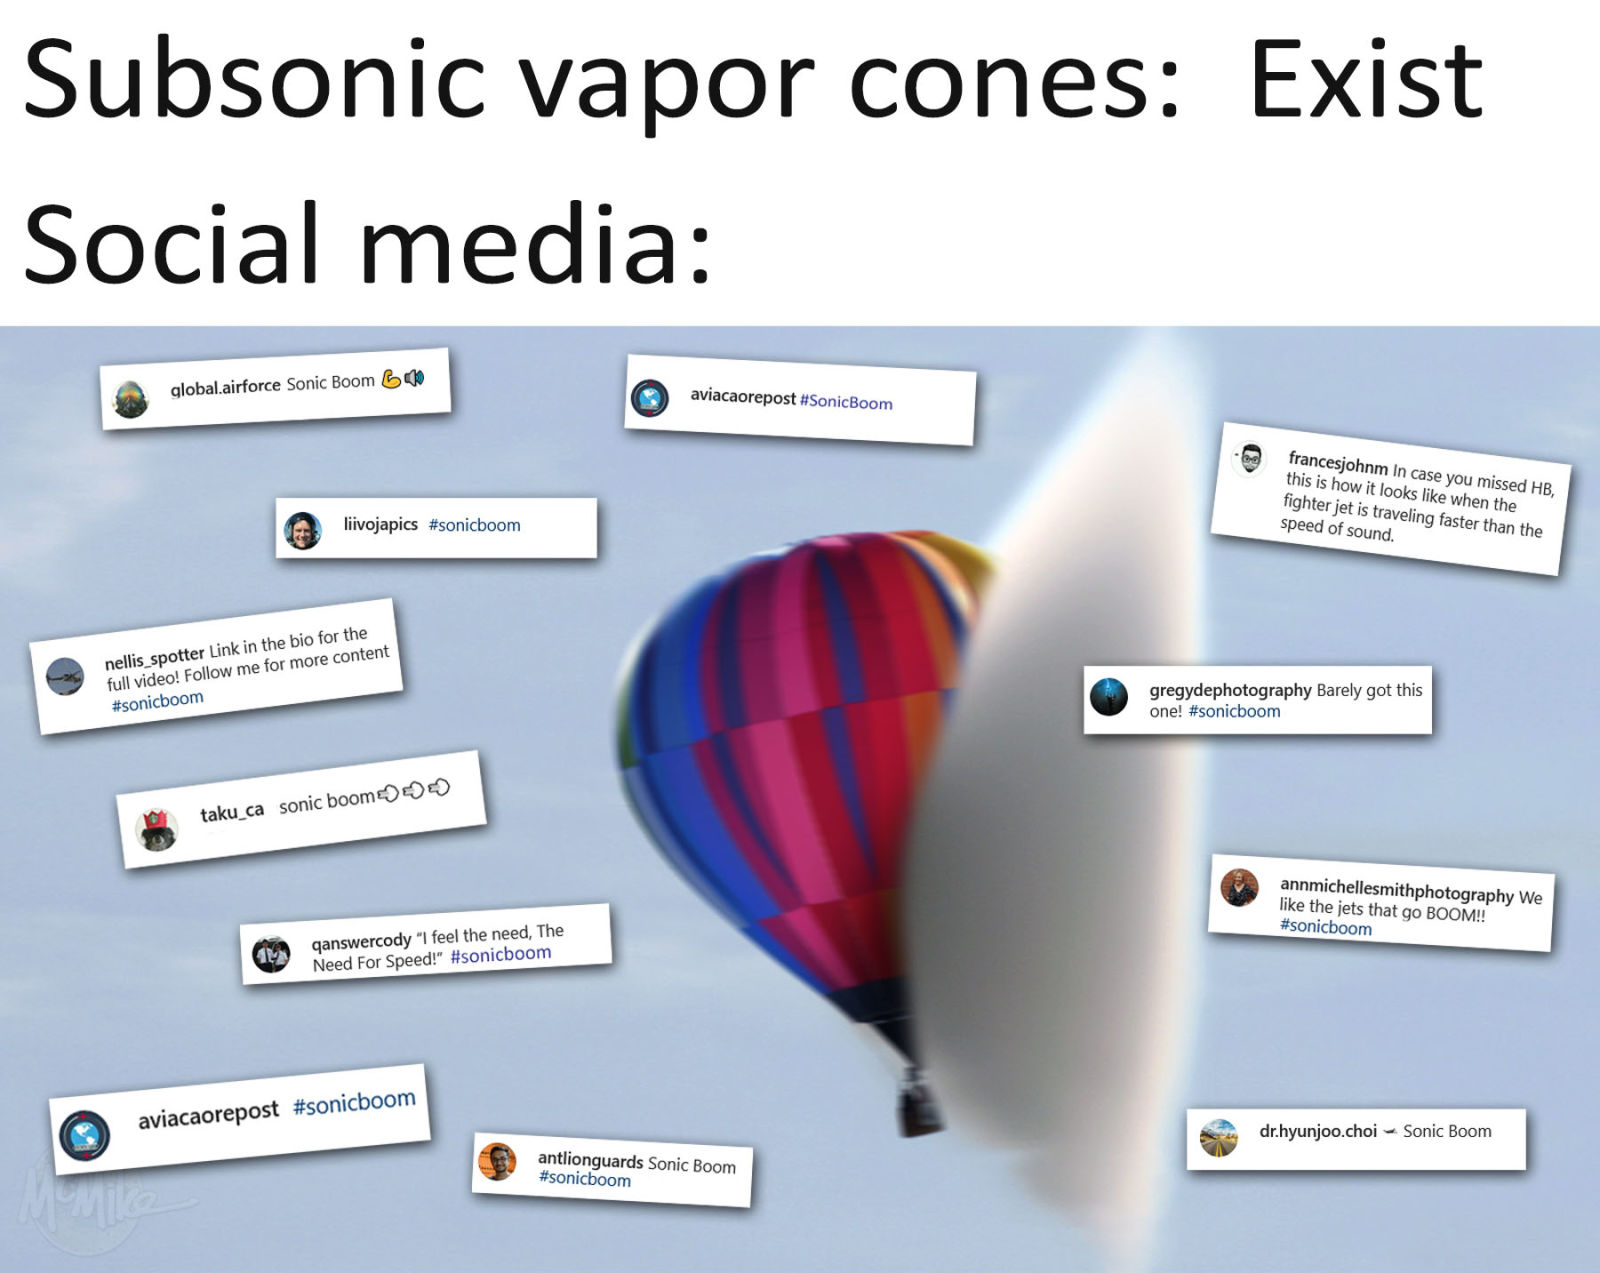 Actual posts from Instagram that claimed vapor cones were sonic booms.  